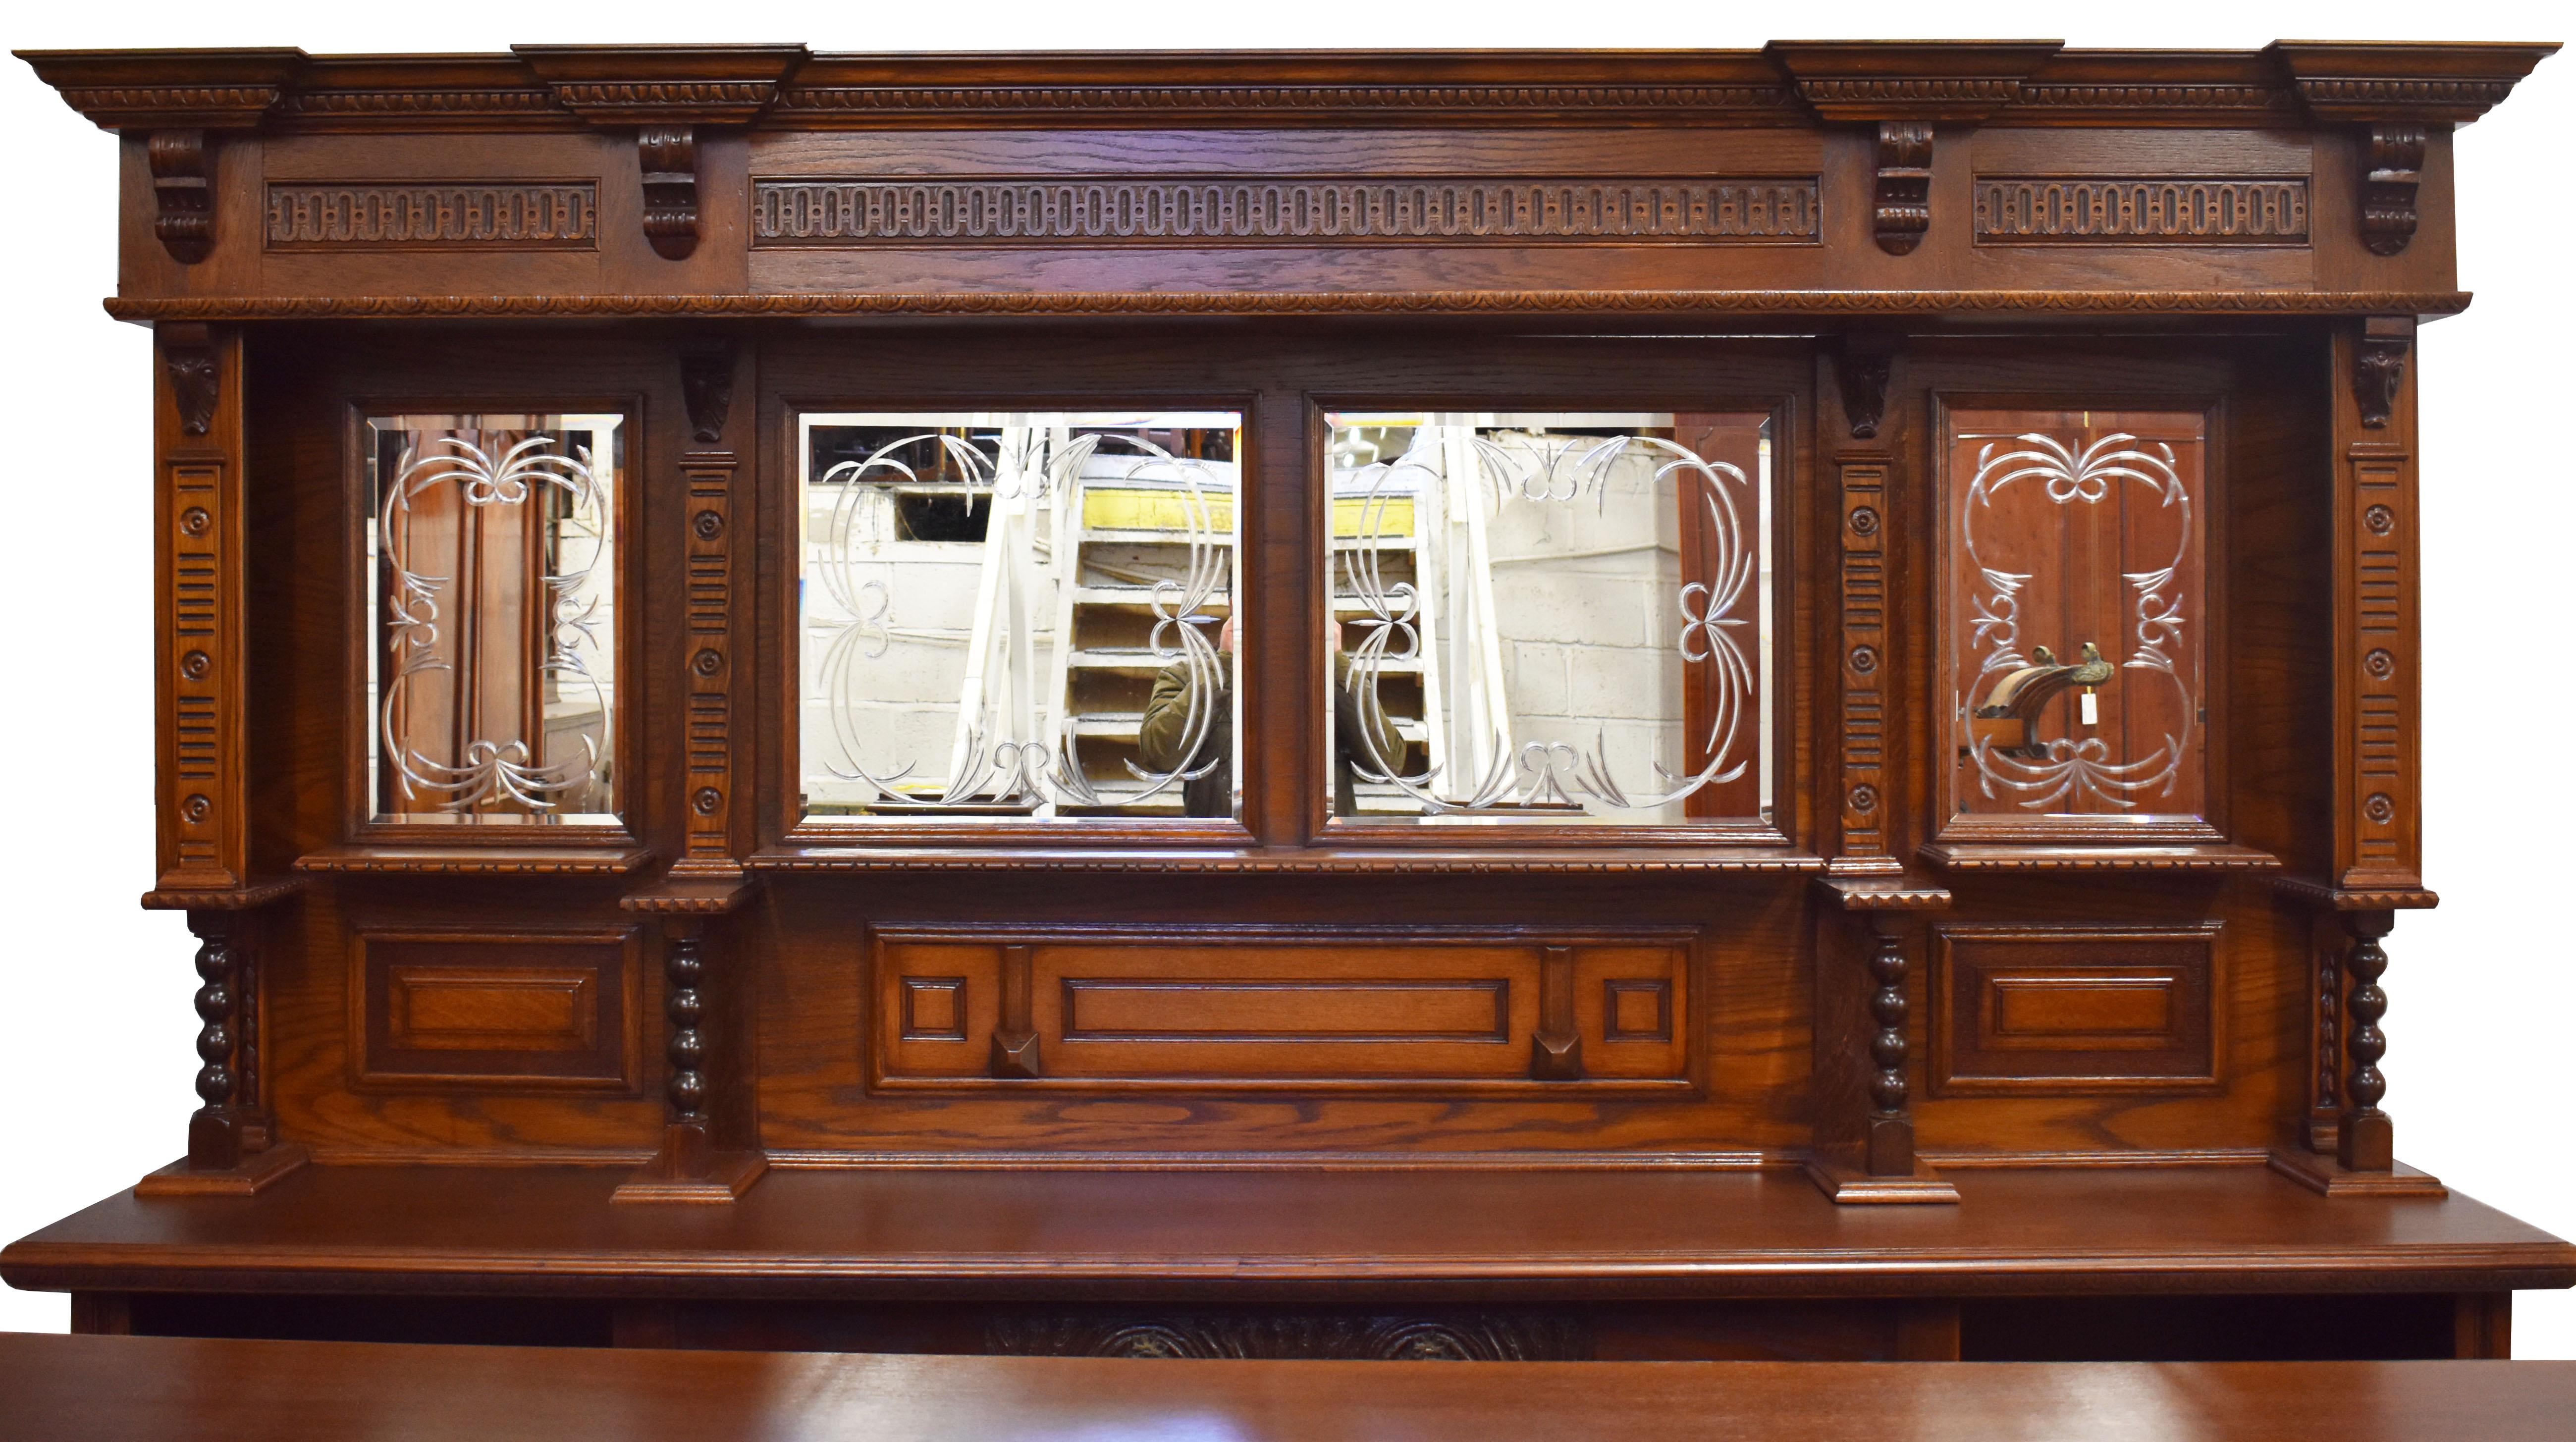 For sale is a Victorian style carved oak front and back bar, having a carved cornice above a mirror back section. The front bar The front bar is ornately carved with four panels. Overall, the bar is in good condition for its age having been fully